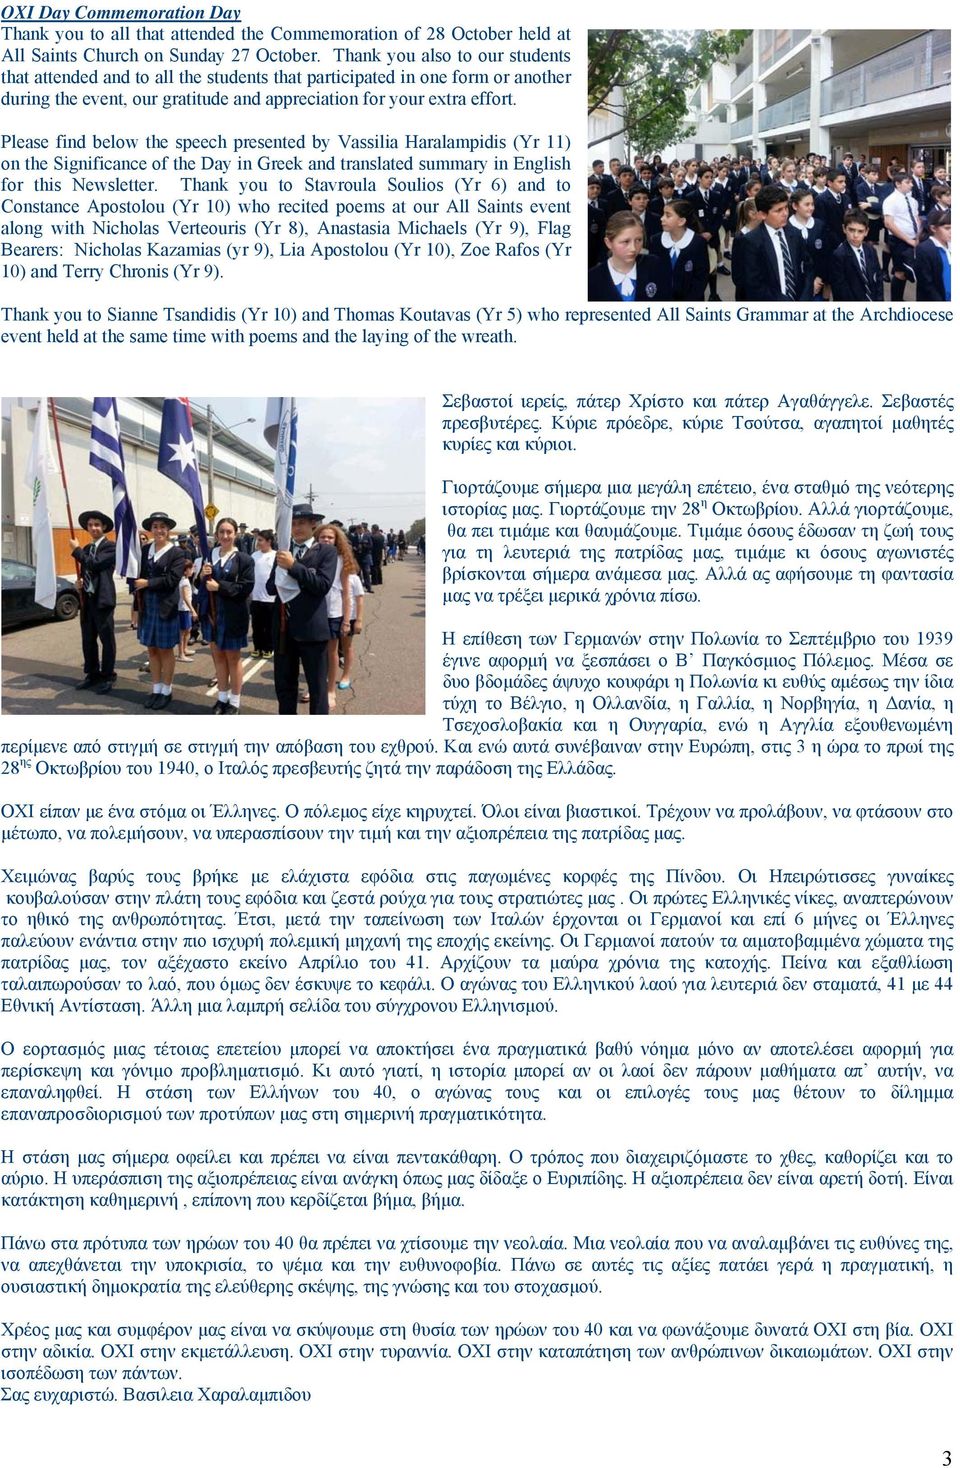 Please find below the speech presented by Vassilia Haralampidis (Yr 11) on the Significance of the Day in Greek and translated summary in English for this Newsletter.